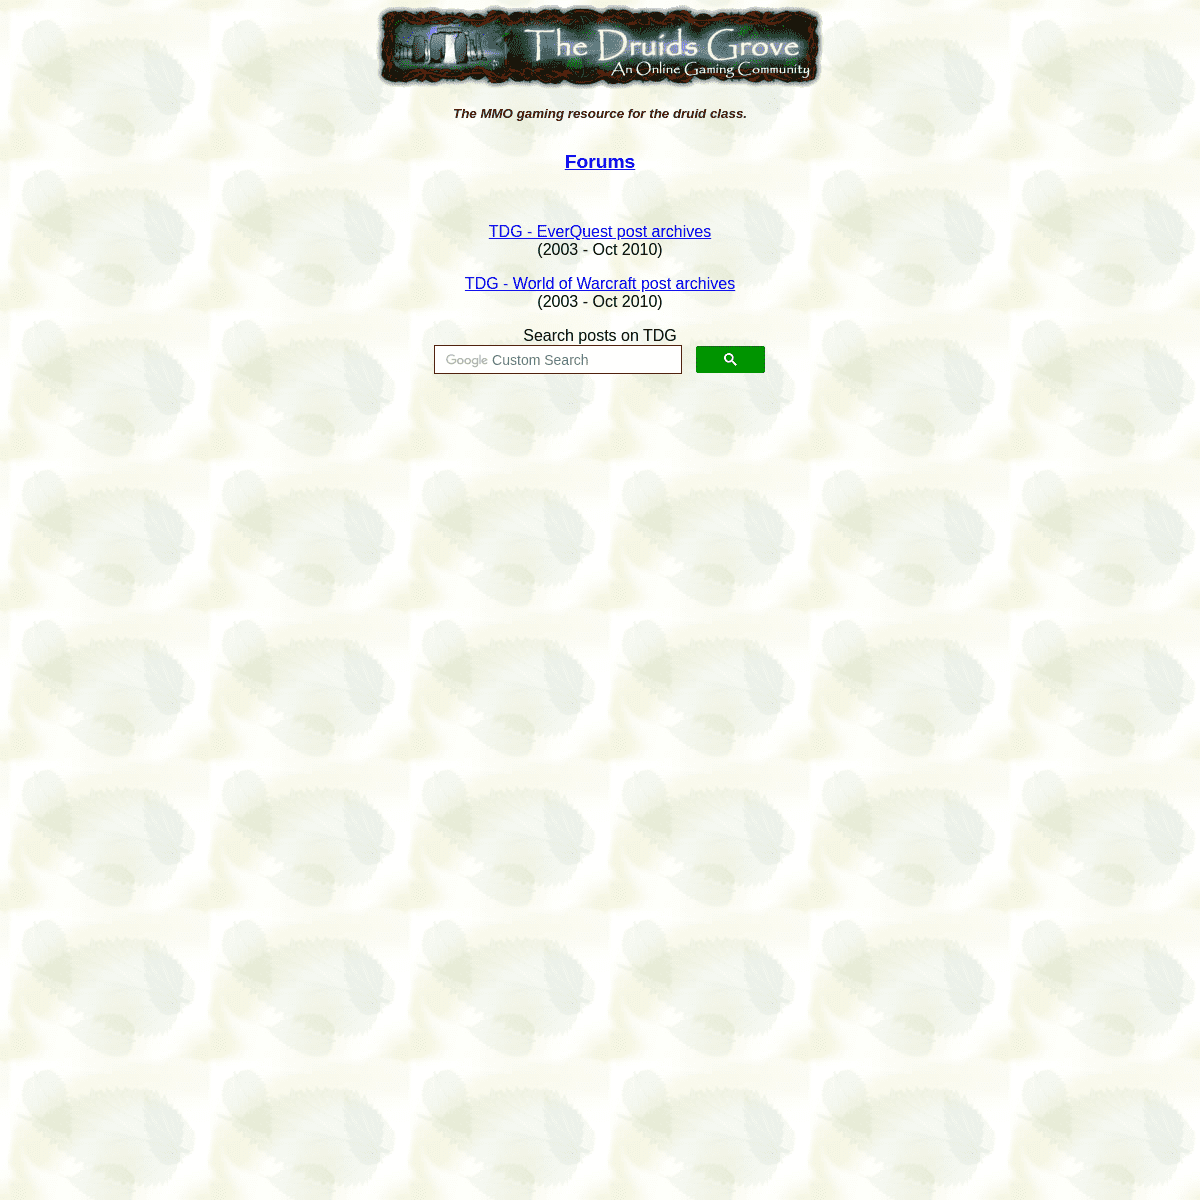 A complete backup of thedruidsgrove.org